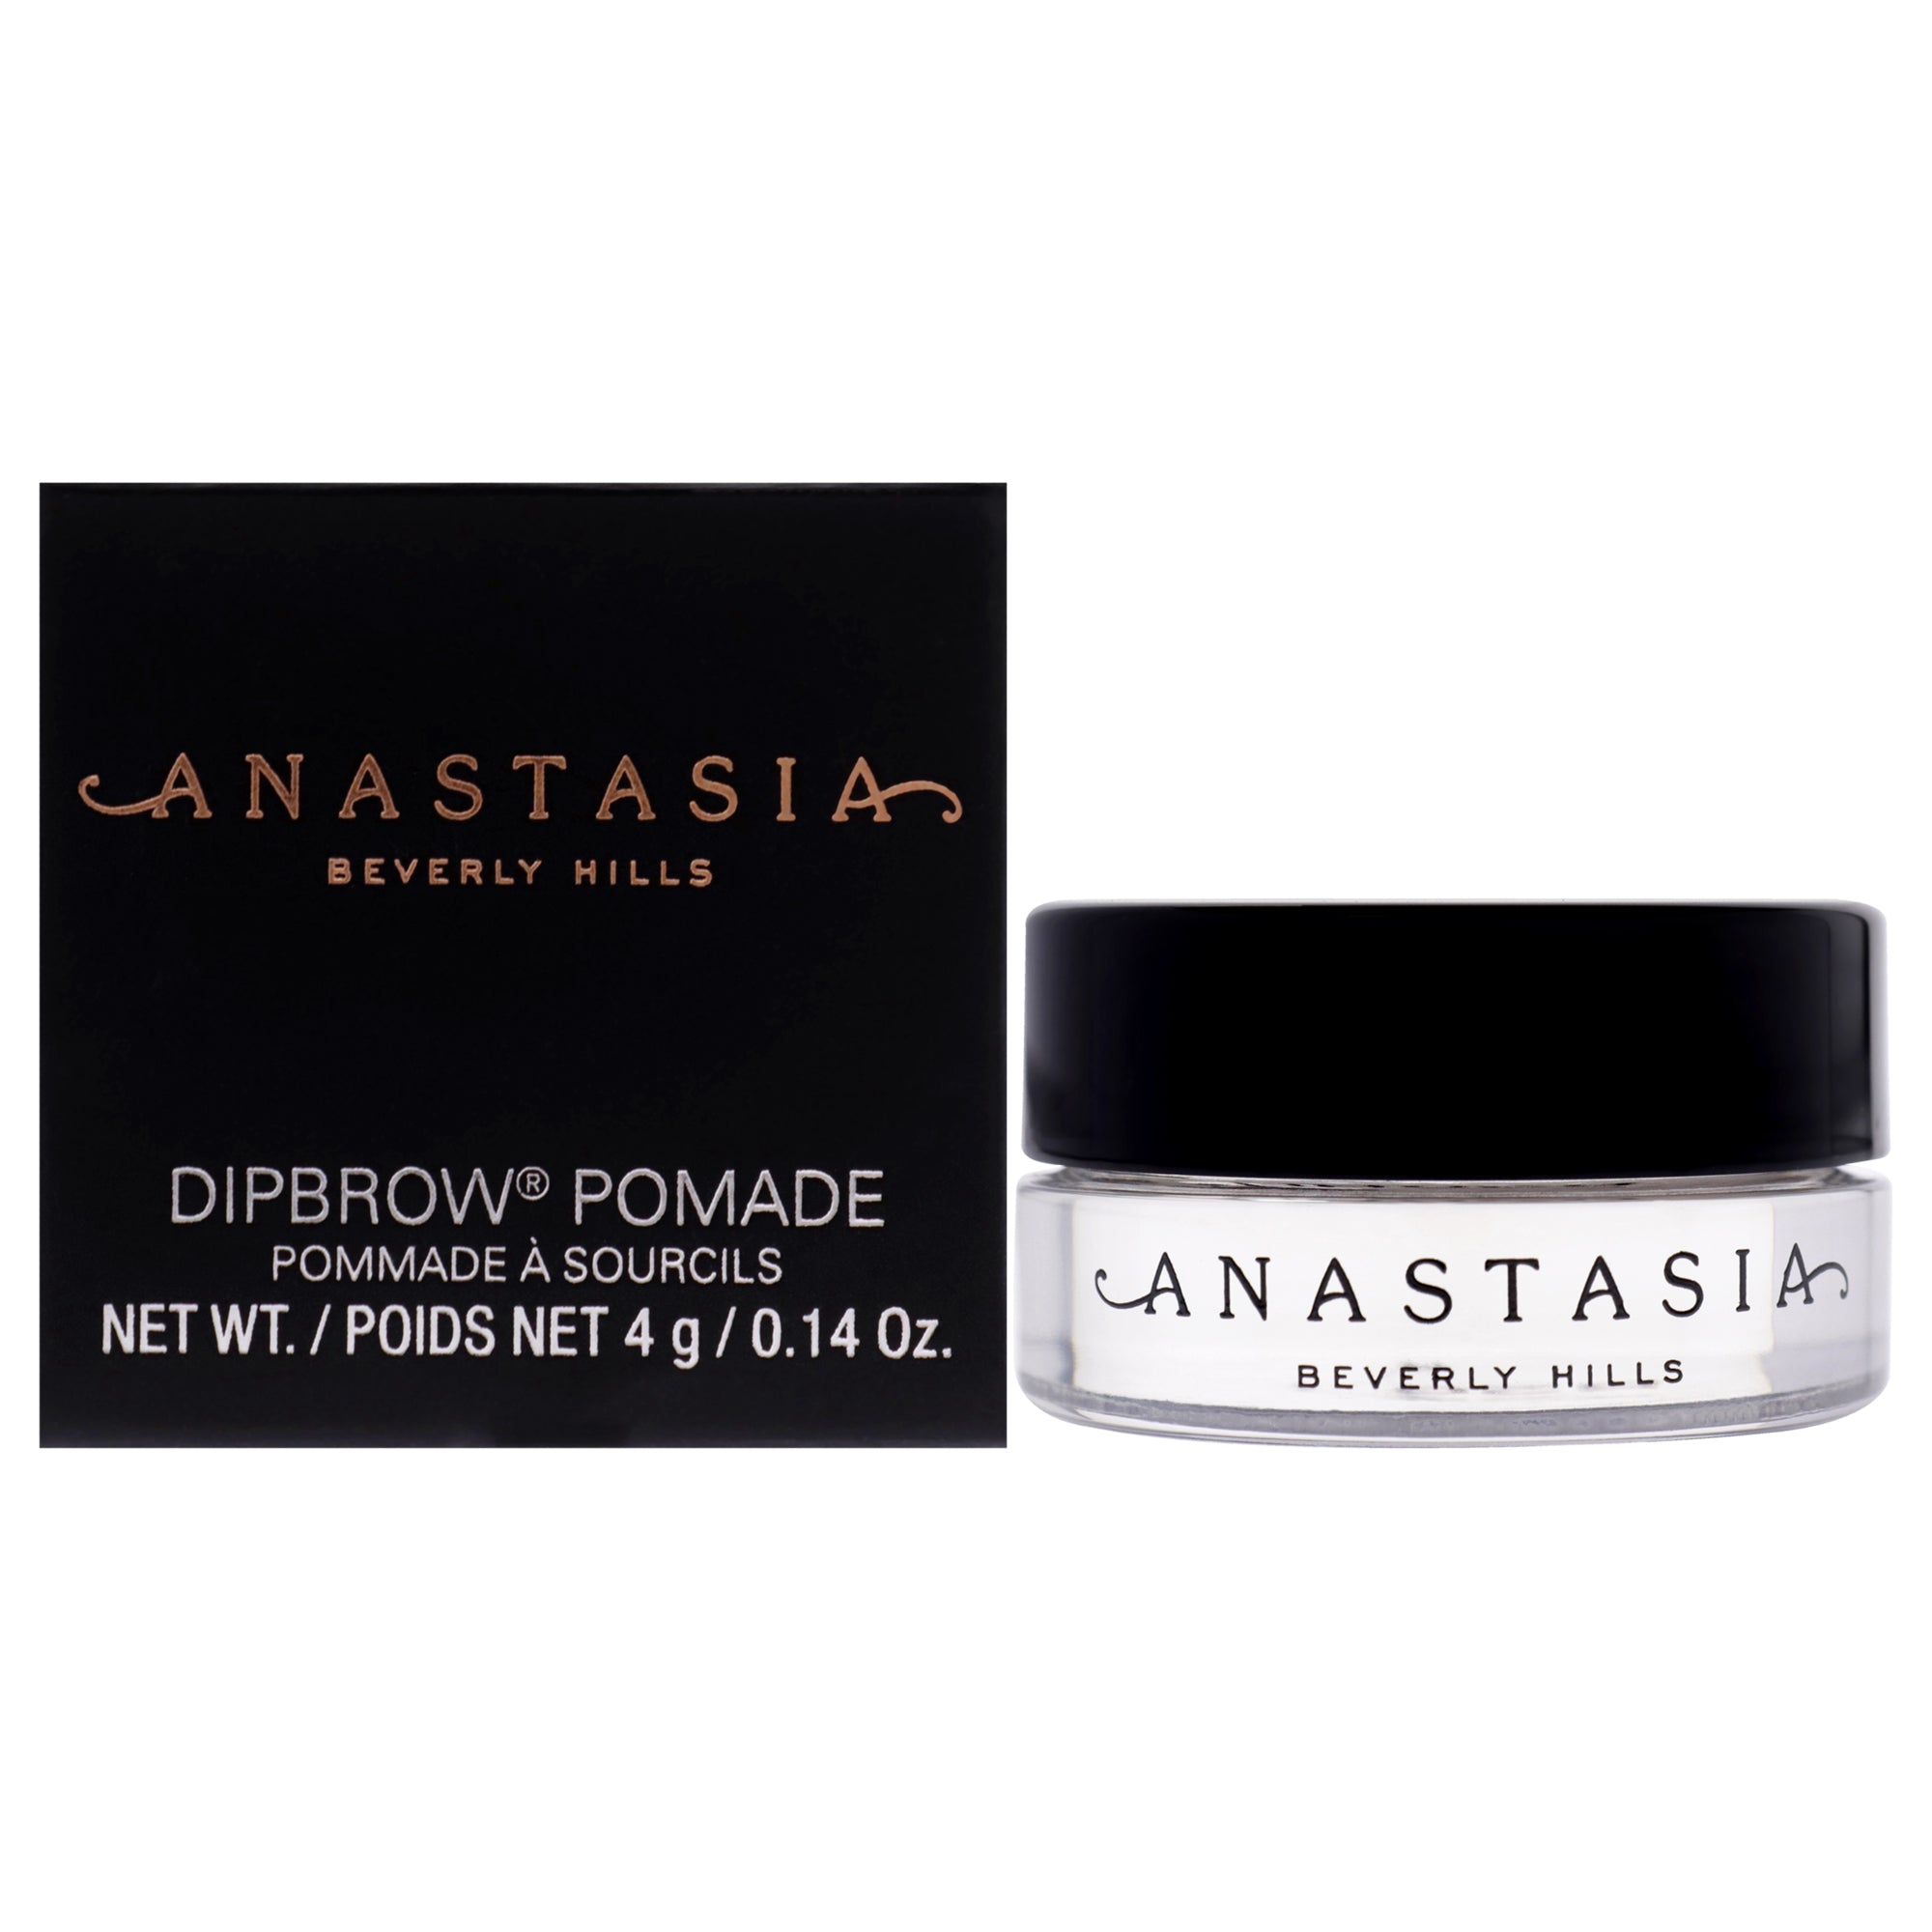 DipBrow Pomade - Ash Brown by Anastasia Beverly Hills for Women - 0.14 oz Eyebrow